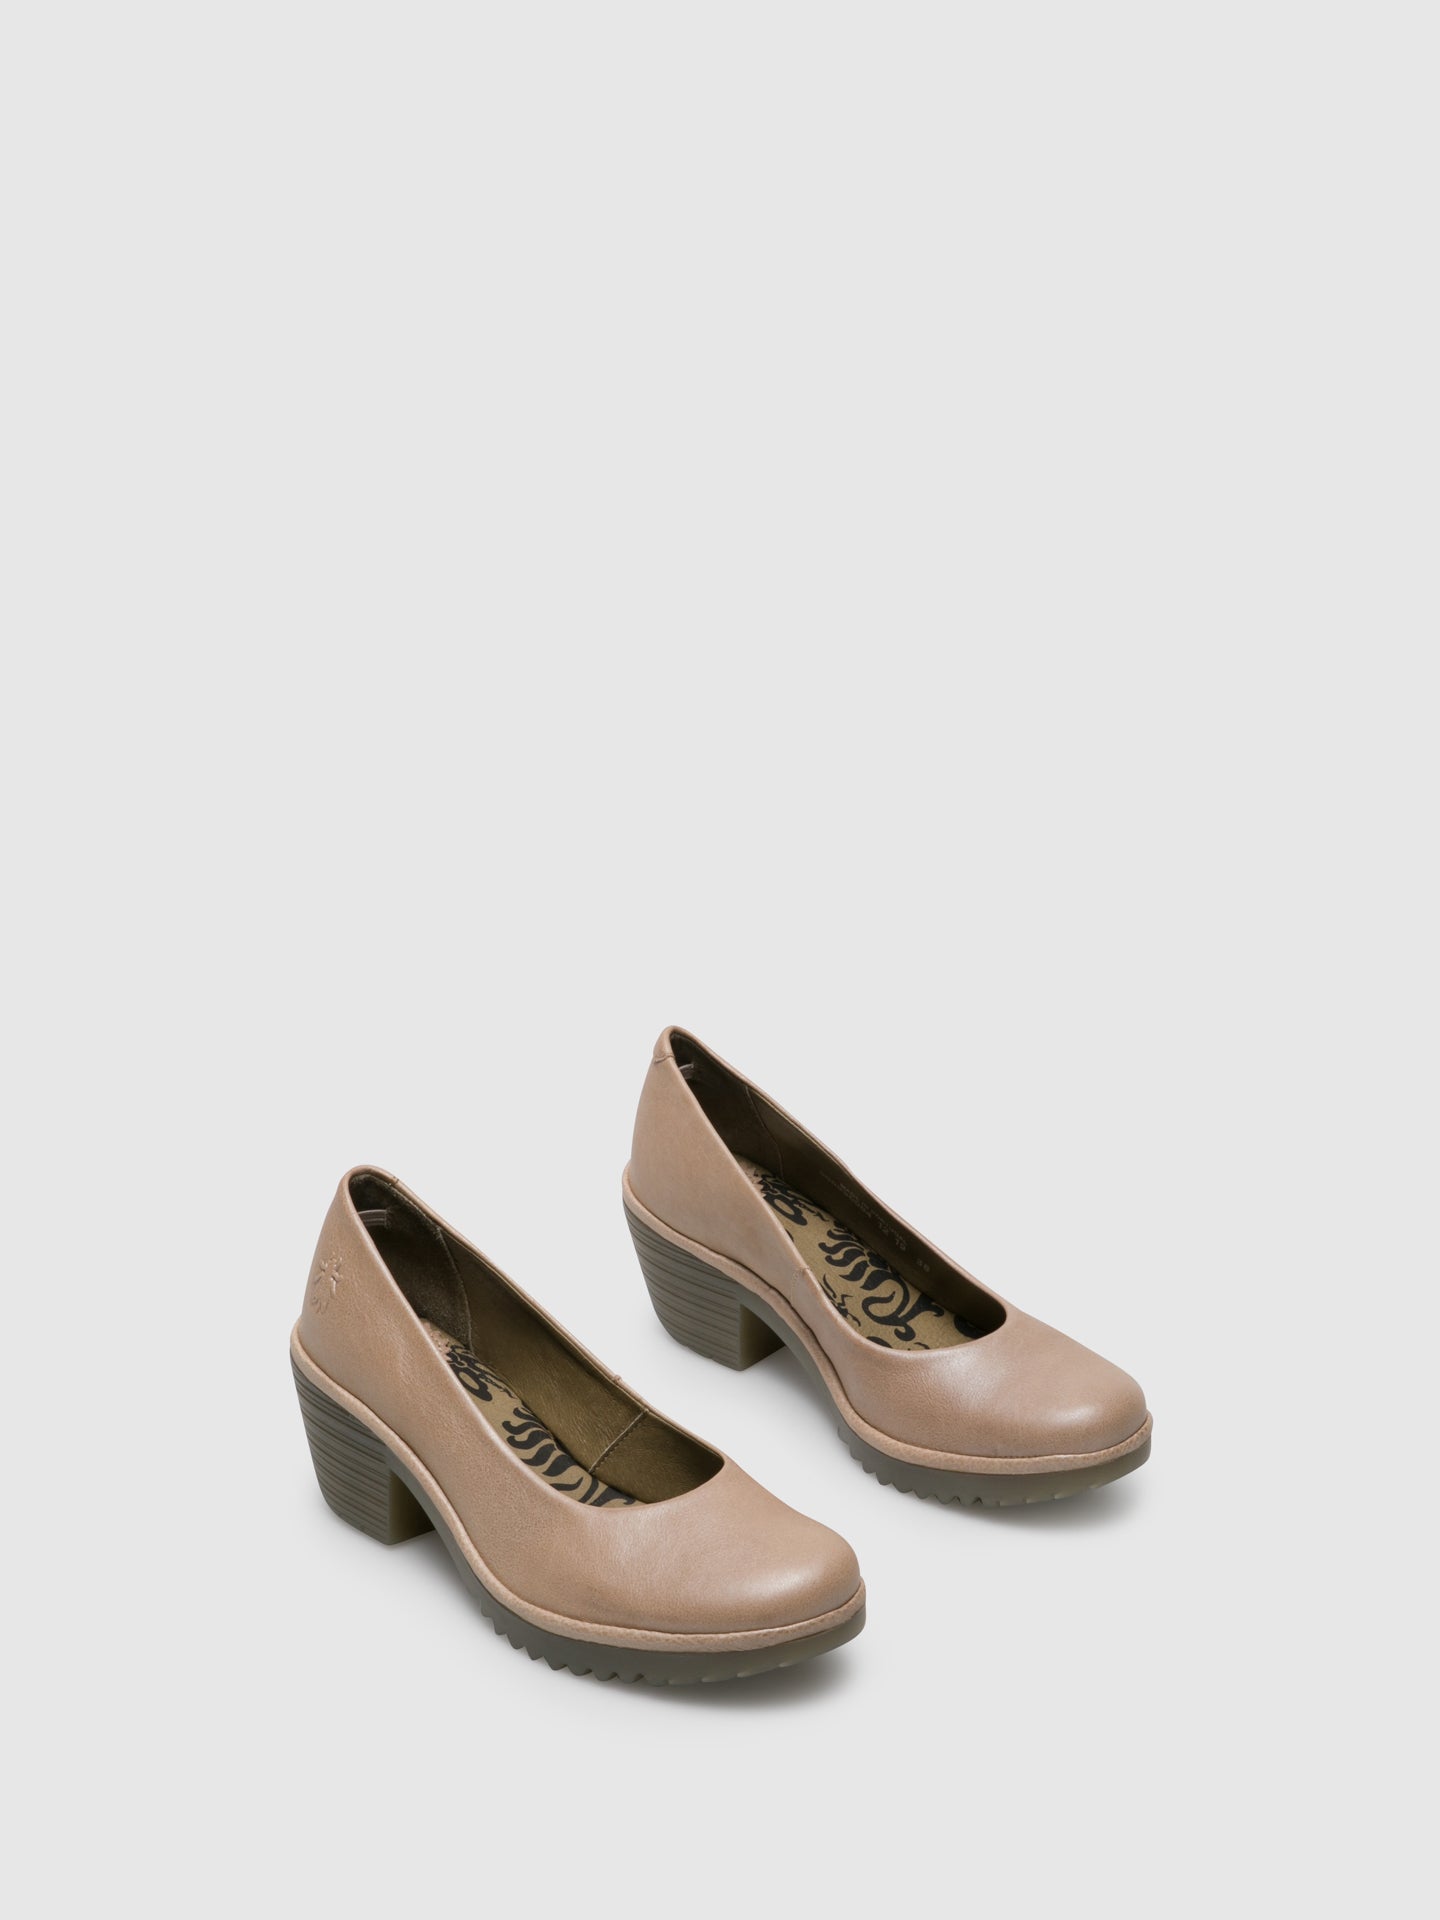 Fly London Beige Round Toe Shoes